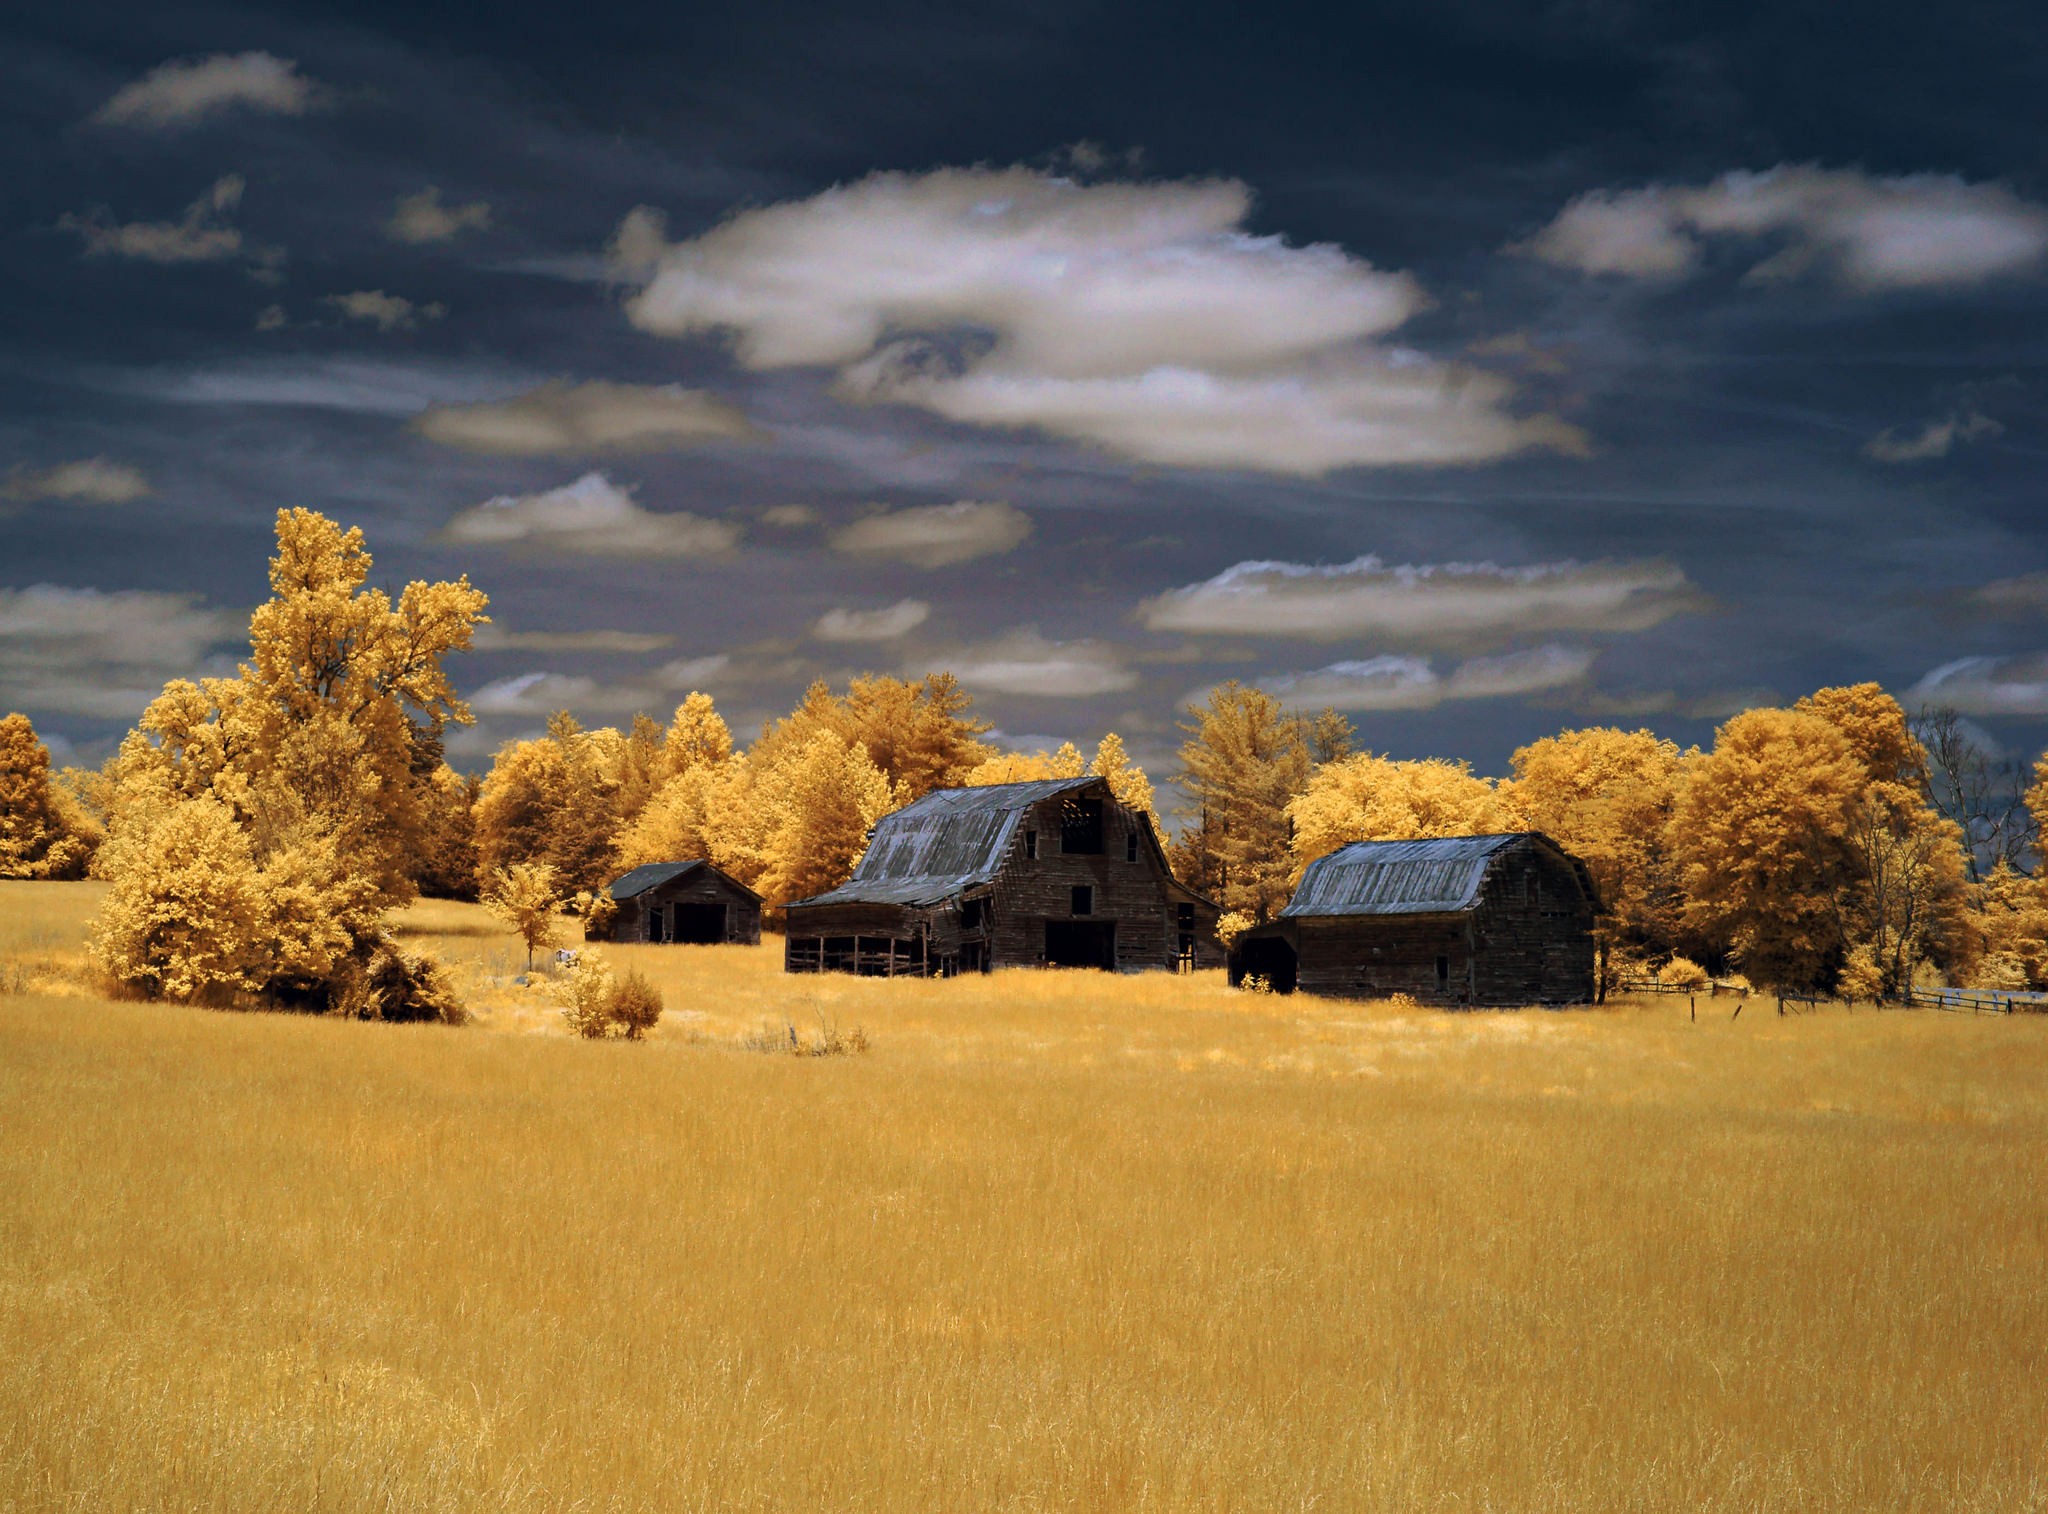 General 2048x1514 barns abandoned dry grass fall color correction yellow outdoors sky clouds plants